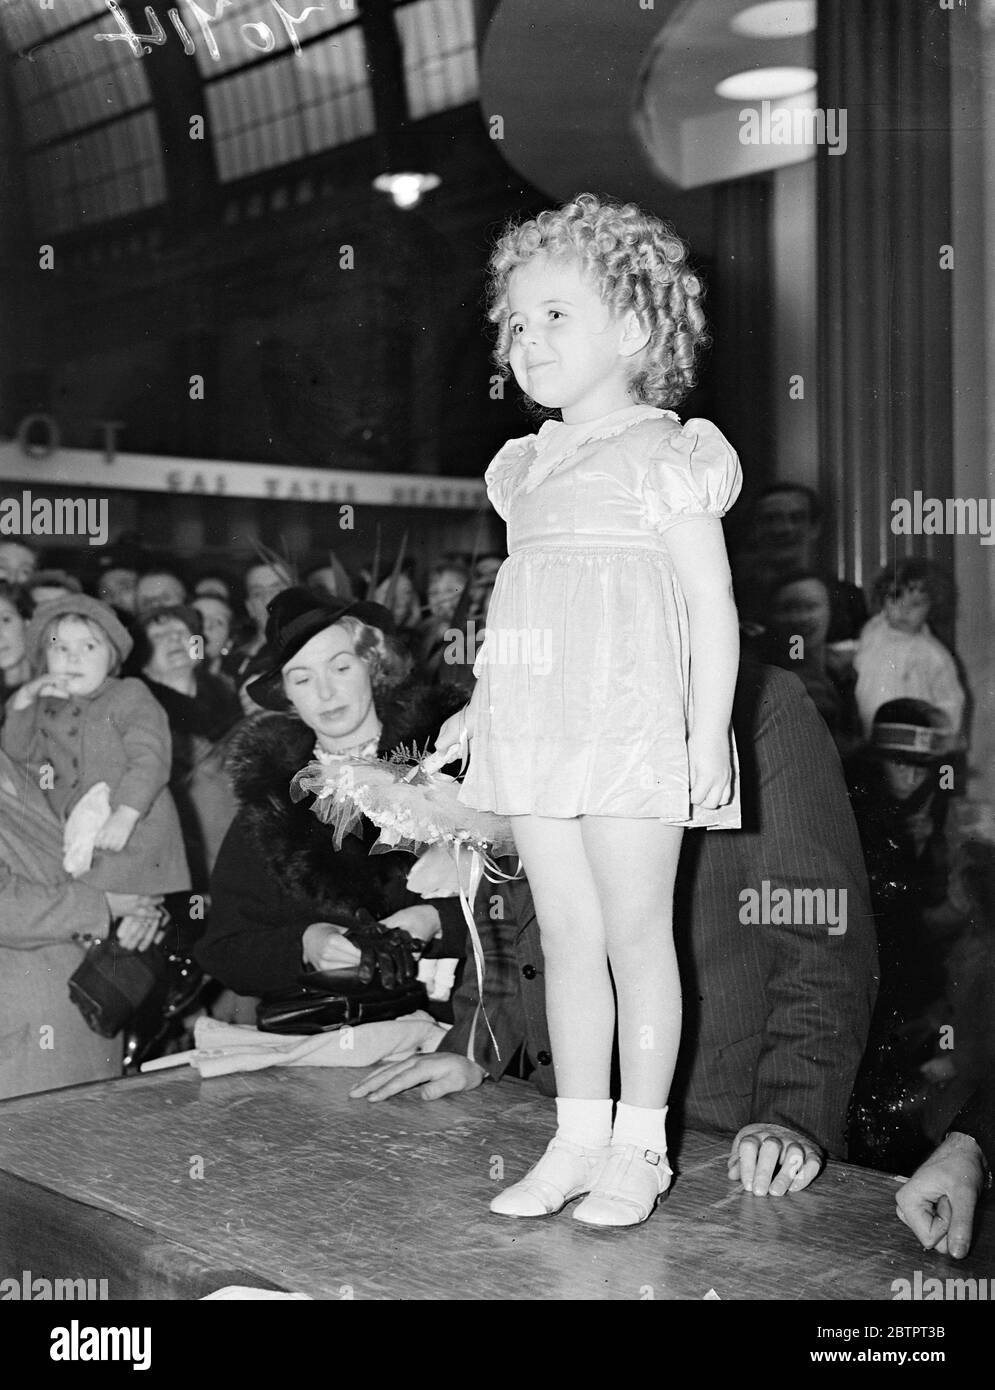 Small speech maker. Binkie Stuart, film actress presents prizes at North London exhibition. Three year-old Binkie Stuart, the film actress, presented prizes in the competition organised for housewives in connection with the north London exhibition at the Alexandra Palace. Photo shows Binkie Stuart making a speech at the prize-giving. 29 October 1937 Stock Photo